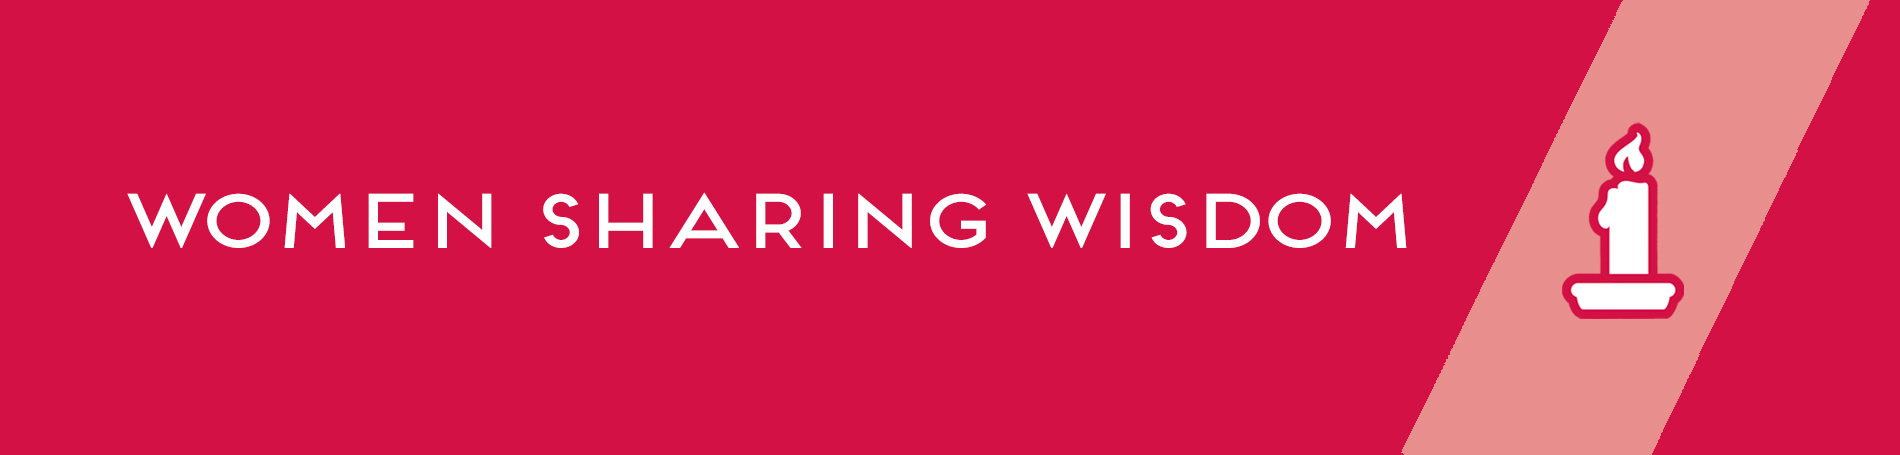 Red background with text (left) that reads "Women Sharing Wisdom" and a ray of light showing a candle (right).